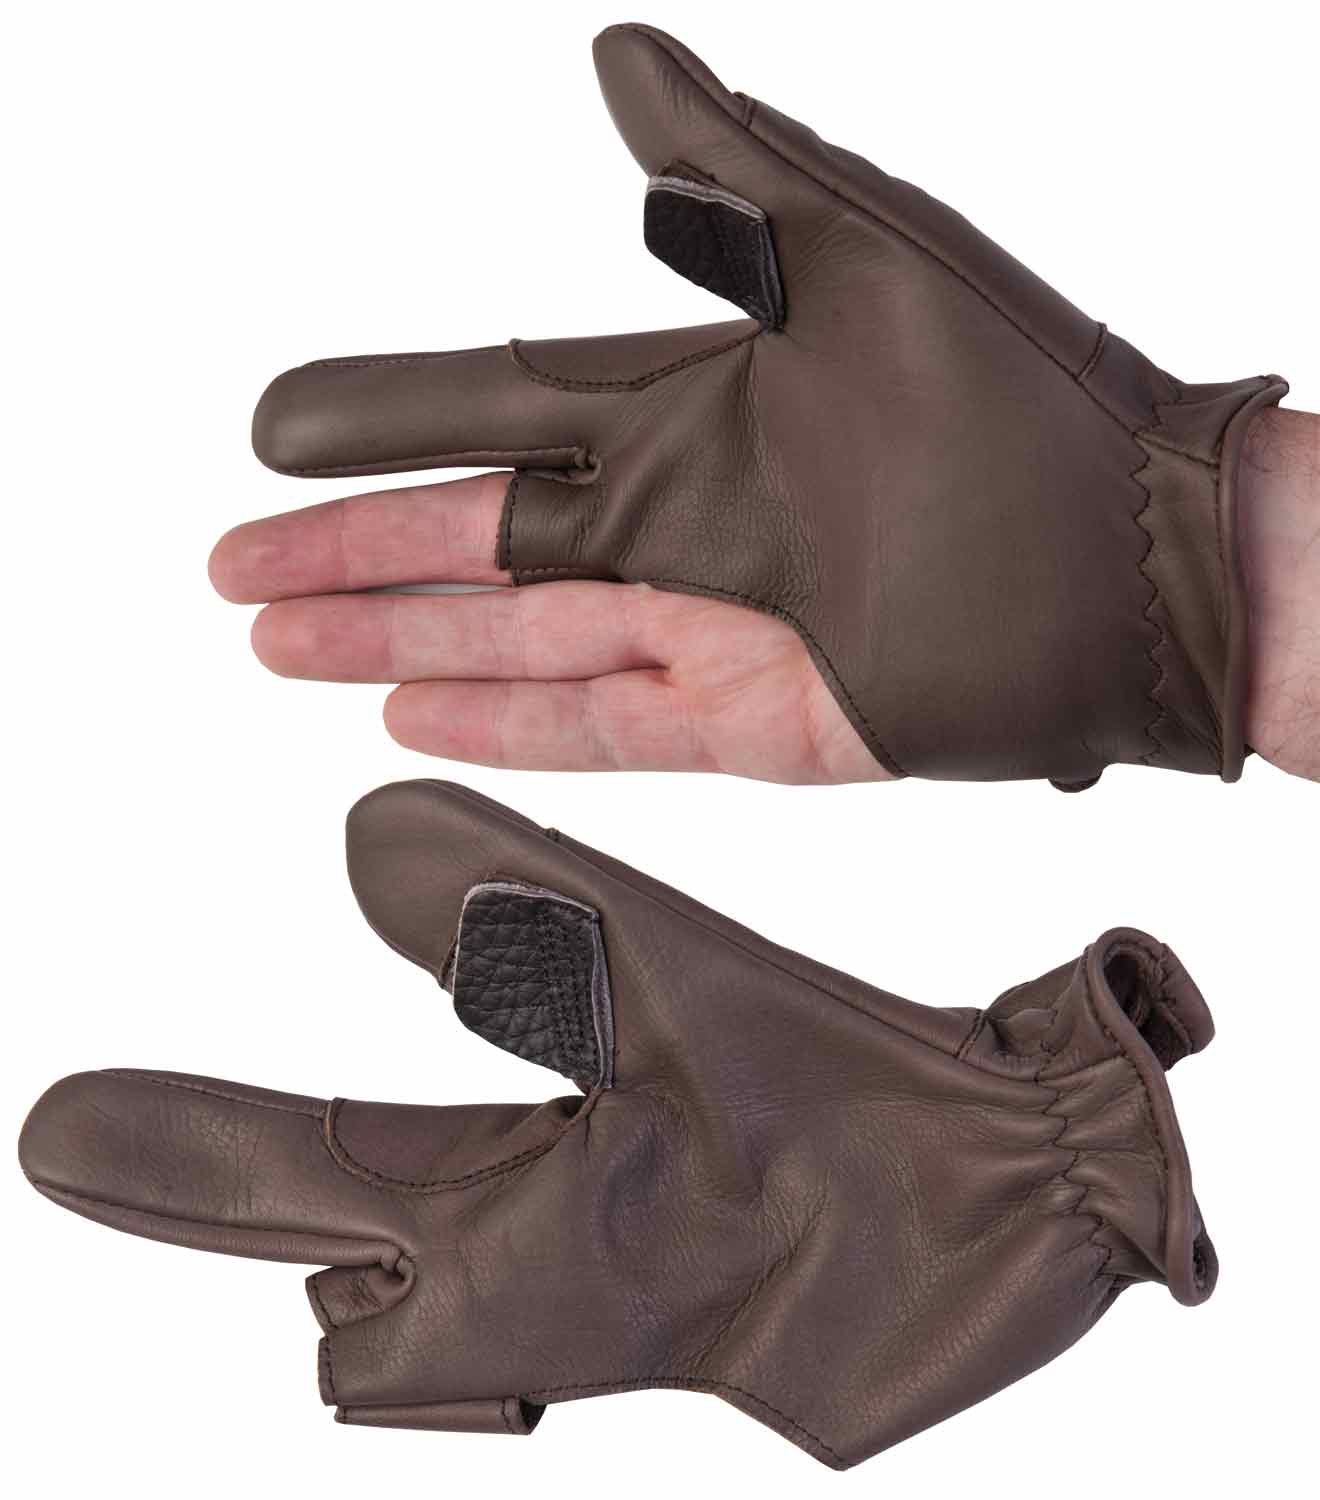 Archery Protective Glove Hand Guard for Archery Bow Shooting Hunting 